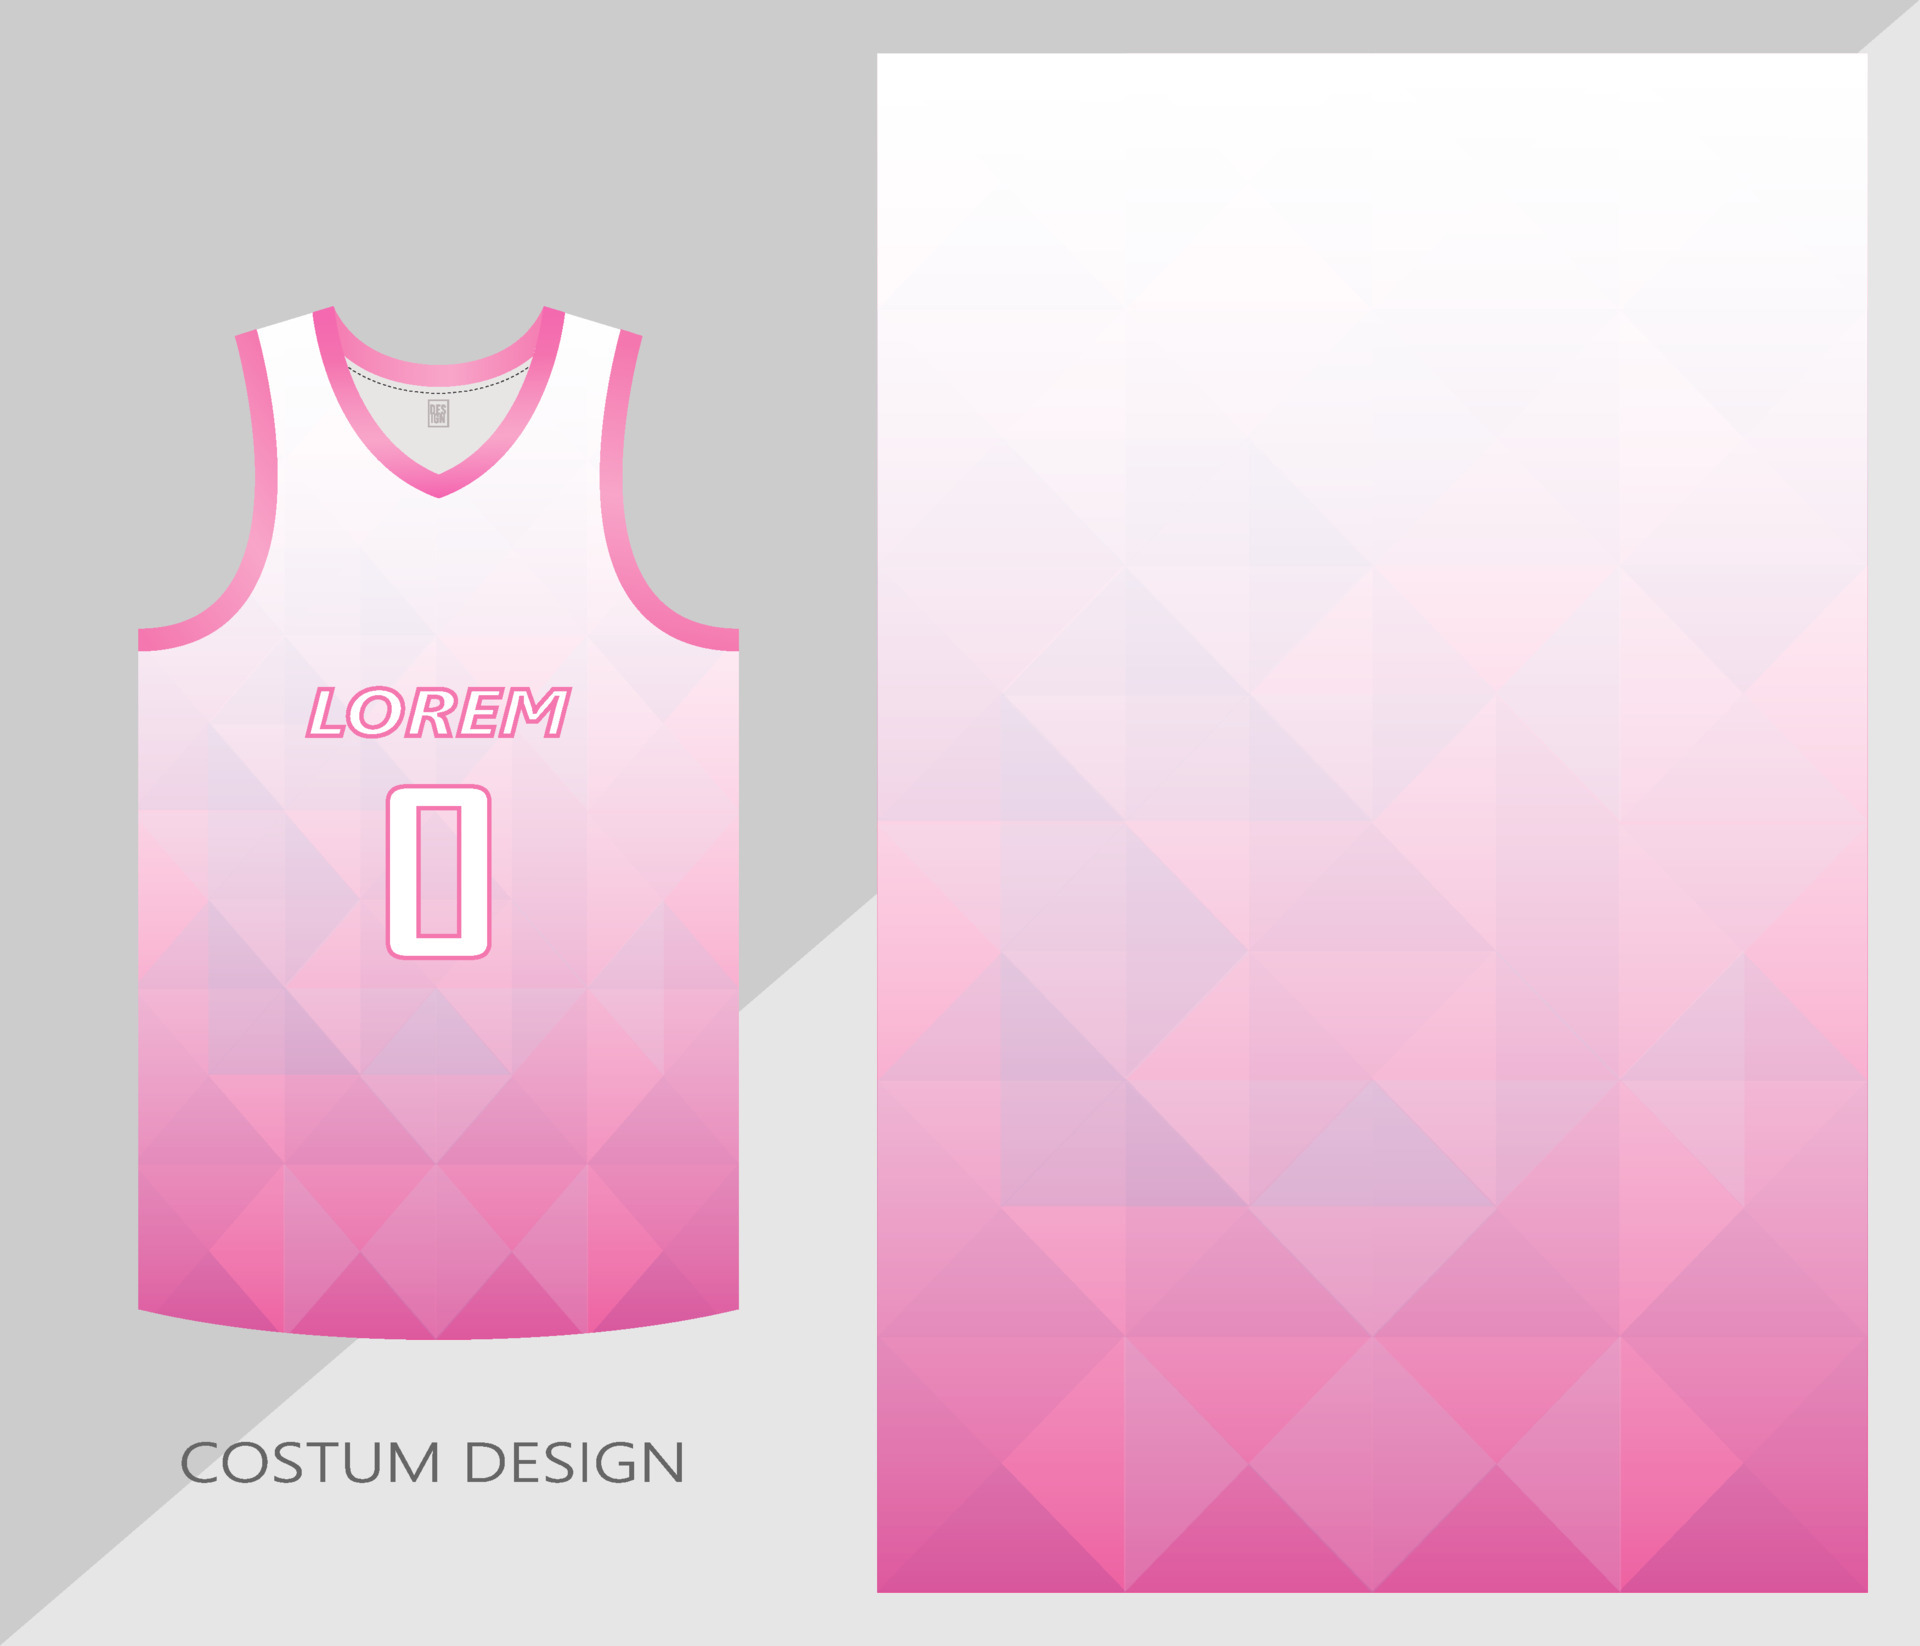 Premium Vector  Basketball jersey design and template